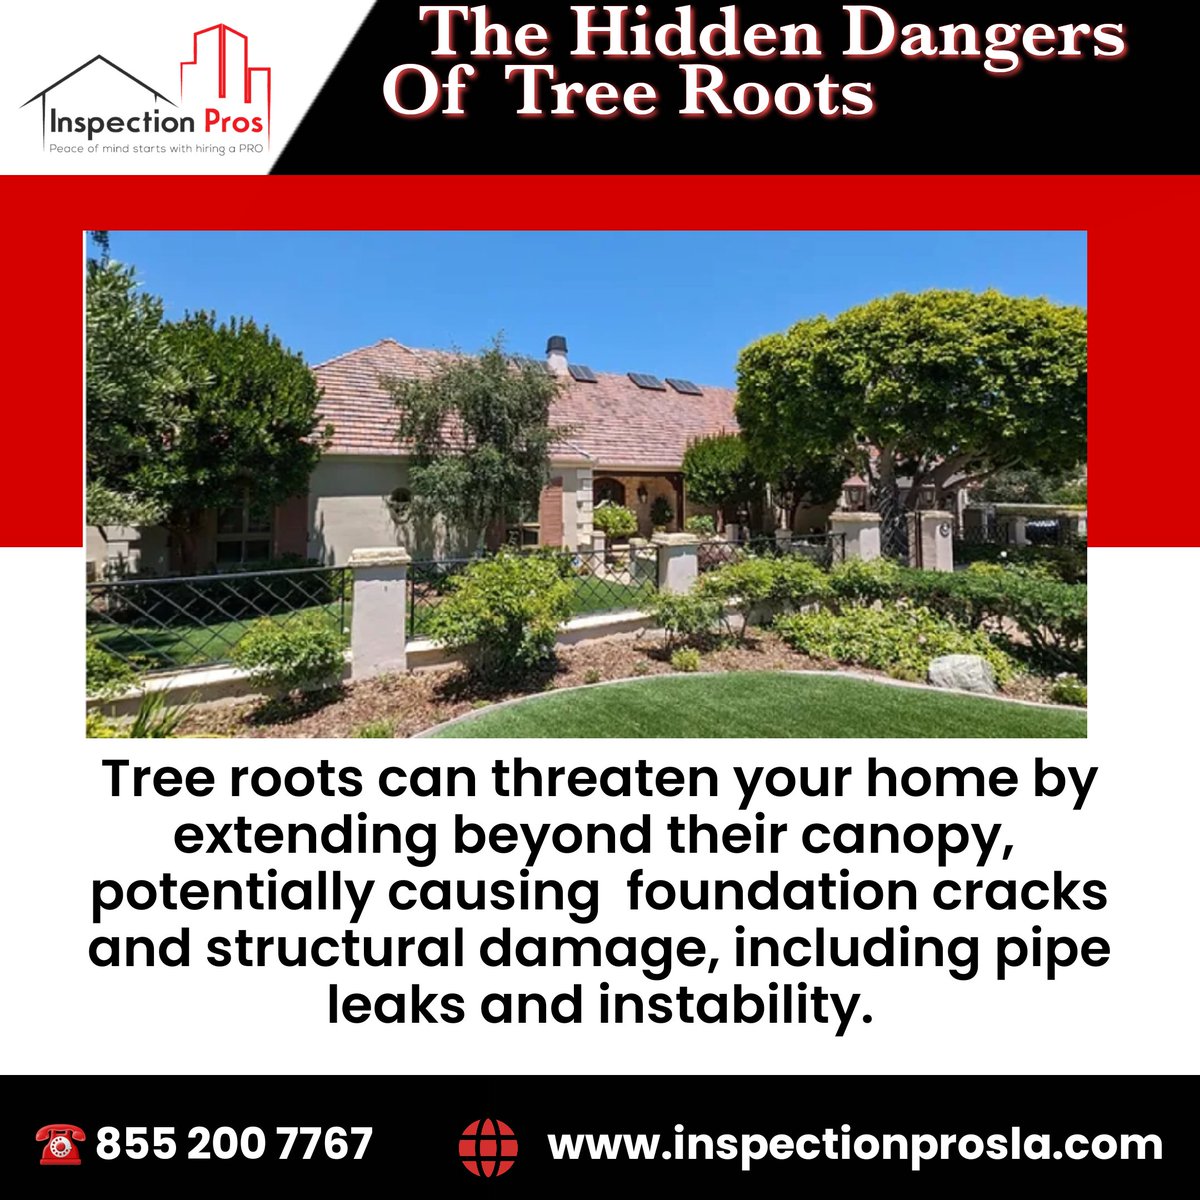 🏕 Tree roots may reach beyond their canopy, threatening your home's foundation with cracks and instability. Protect against aggressive roots to prevent leaks and damage. 
inspectionprosla.com 
#HomeSafety #TreeRootDamage #FoundationCare #ProtectYourHome #homesafehome  #home